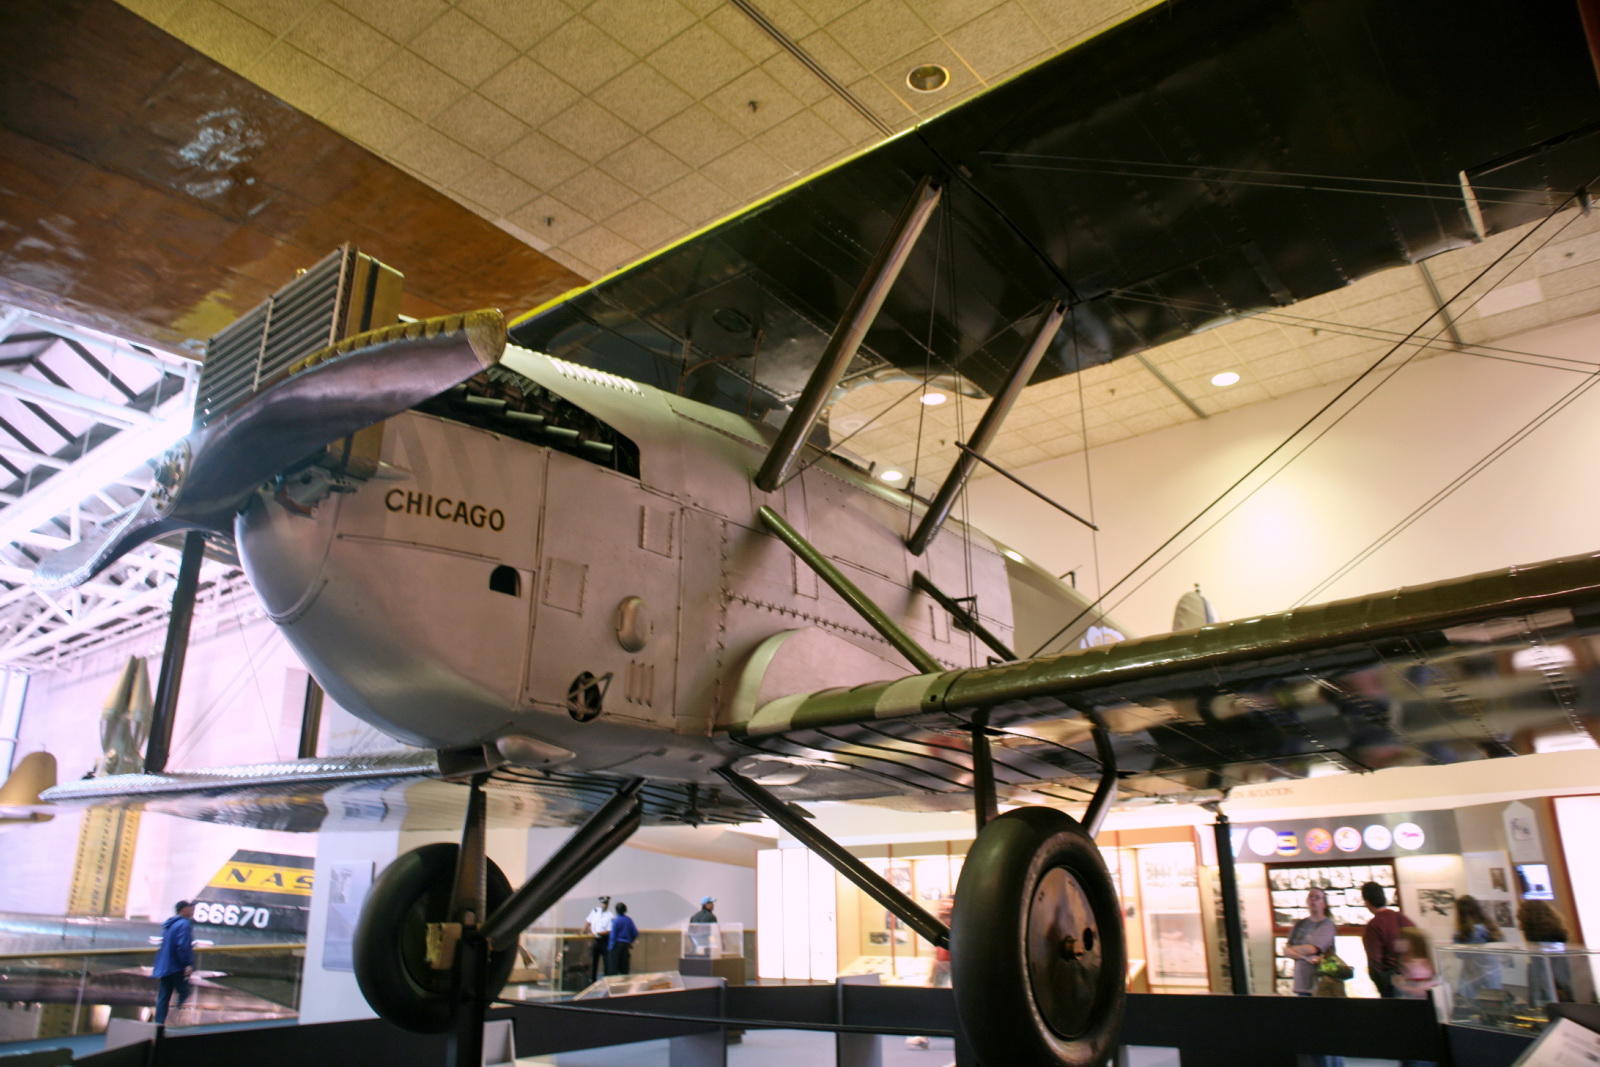 a plane displayed inside a museum with people looking at it